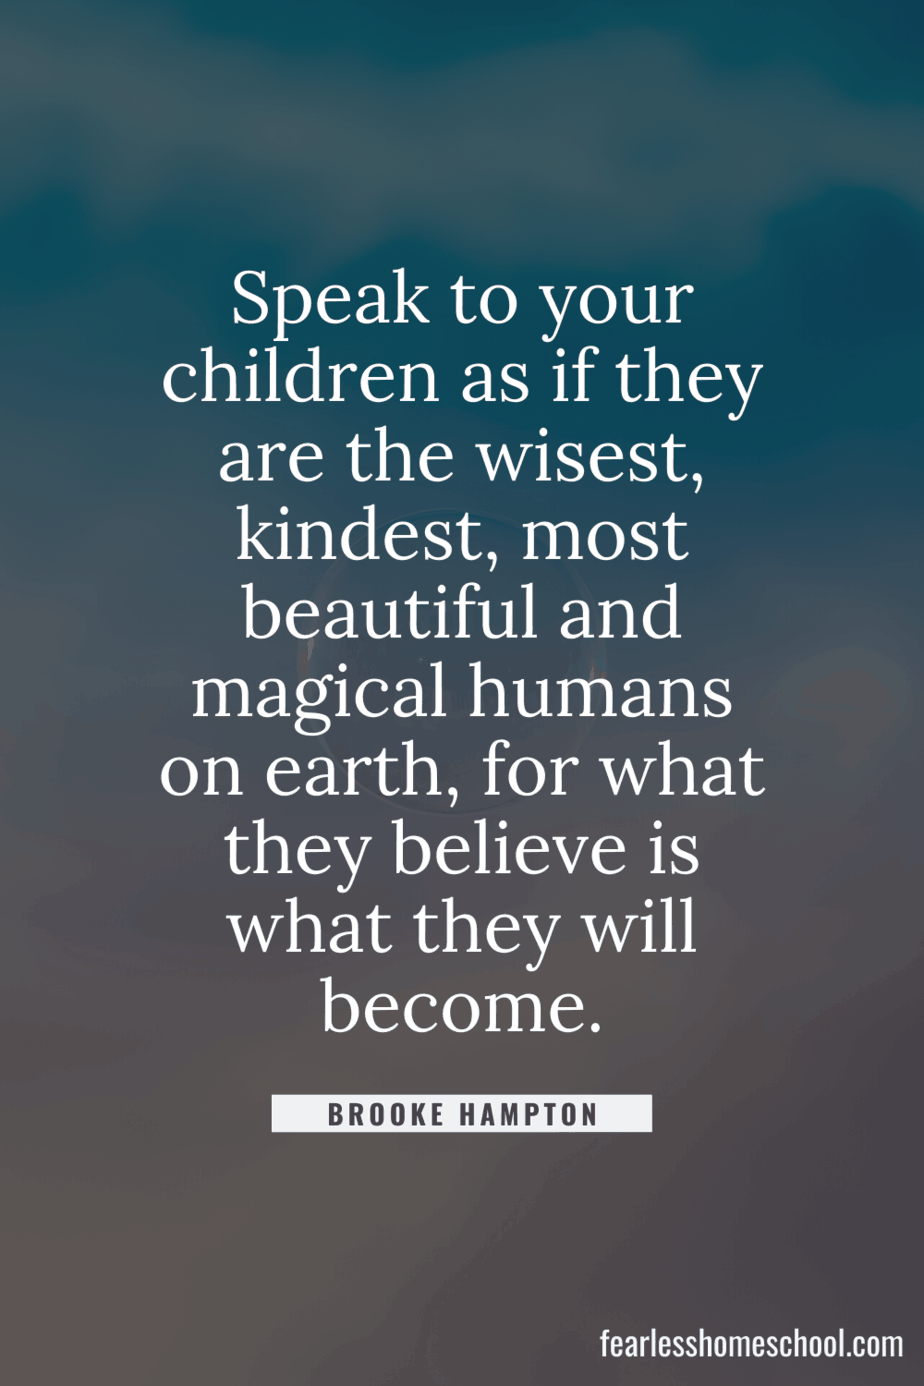 Speak to your children as if they are the wisest, kindest, most beautiful and magical humans on earth, for what they believe is what they will become. Brooke Hampton homeschooling quote